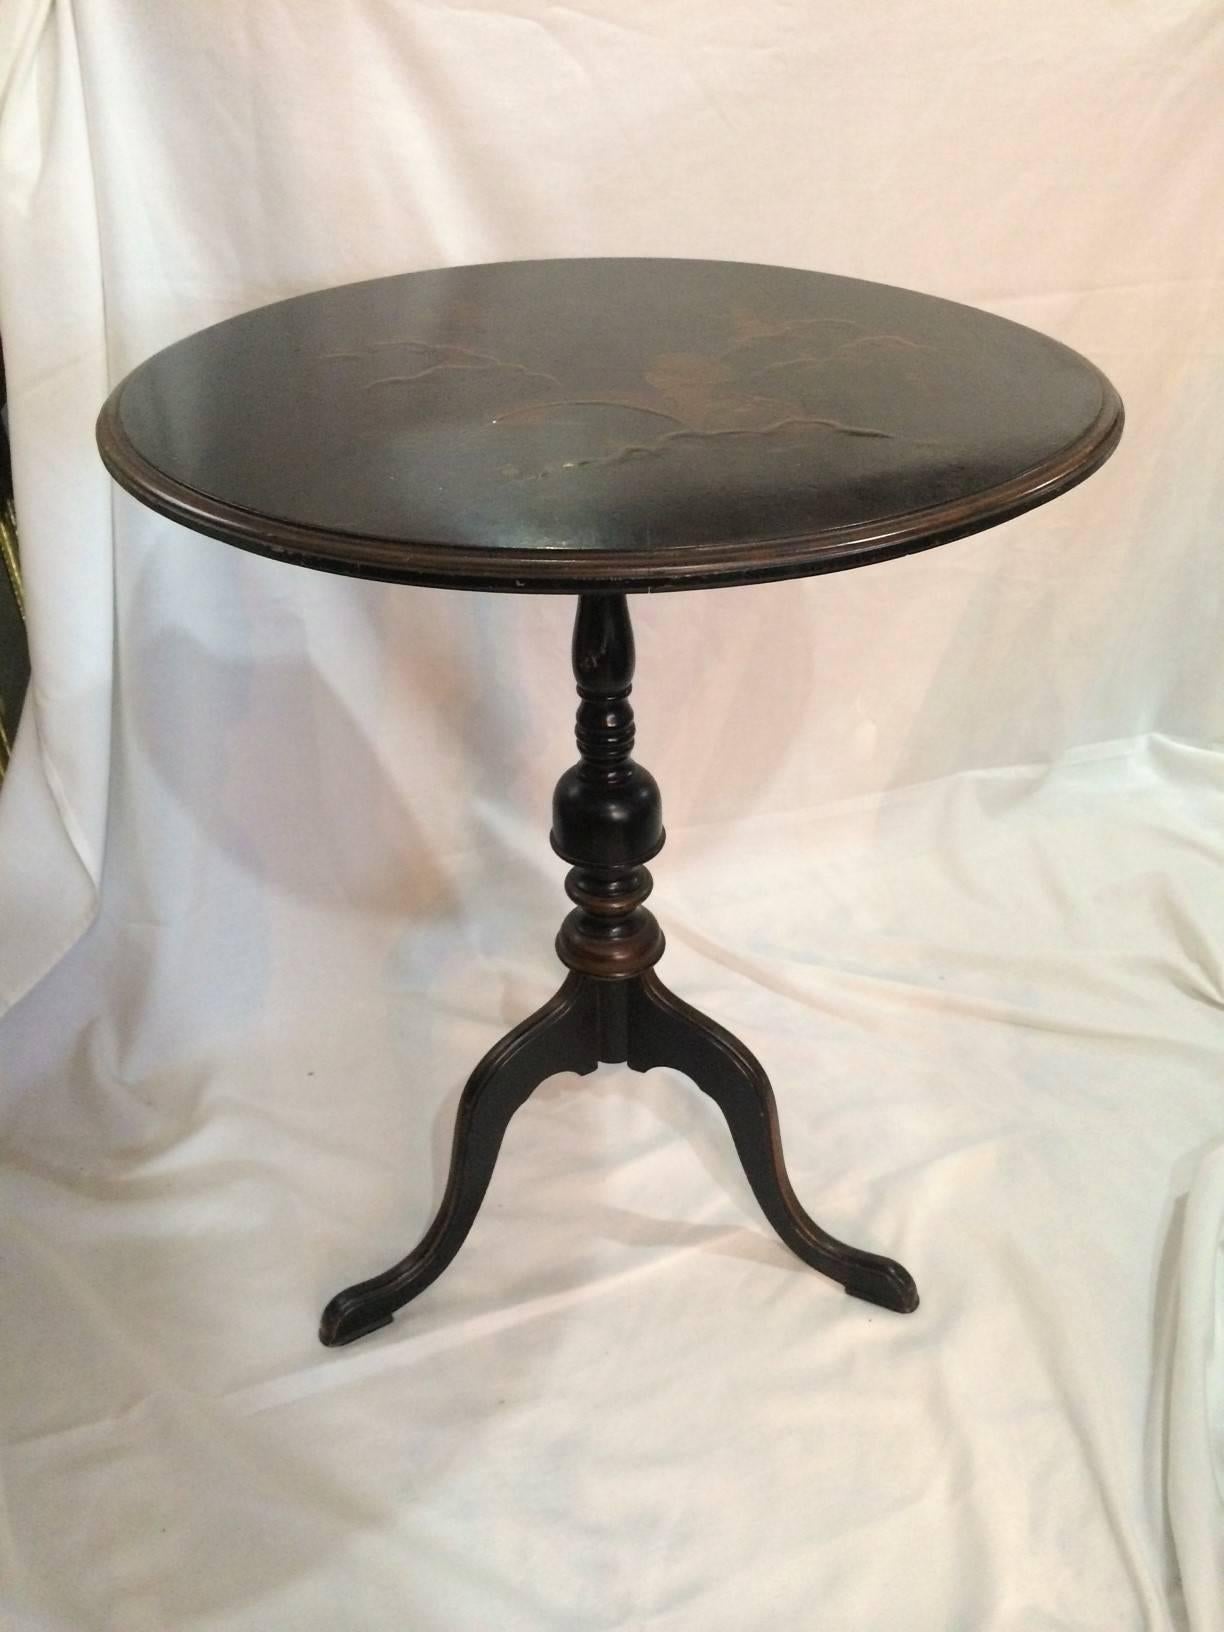 20th Century Beautiful Hand-Painted Round Black and Gold Chinoiserie Table on Tripod Base